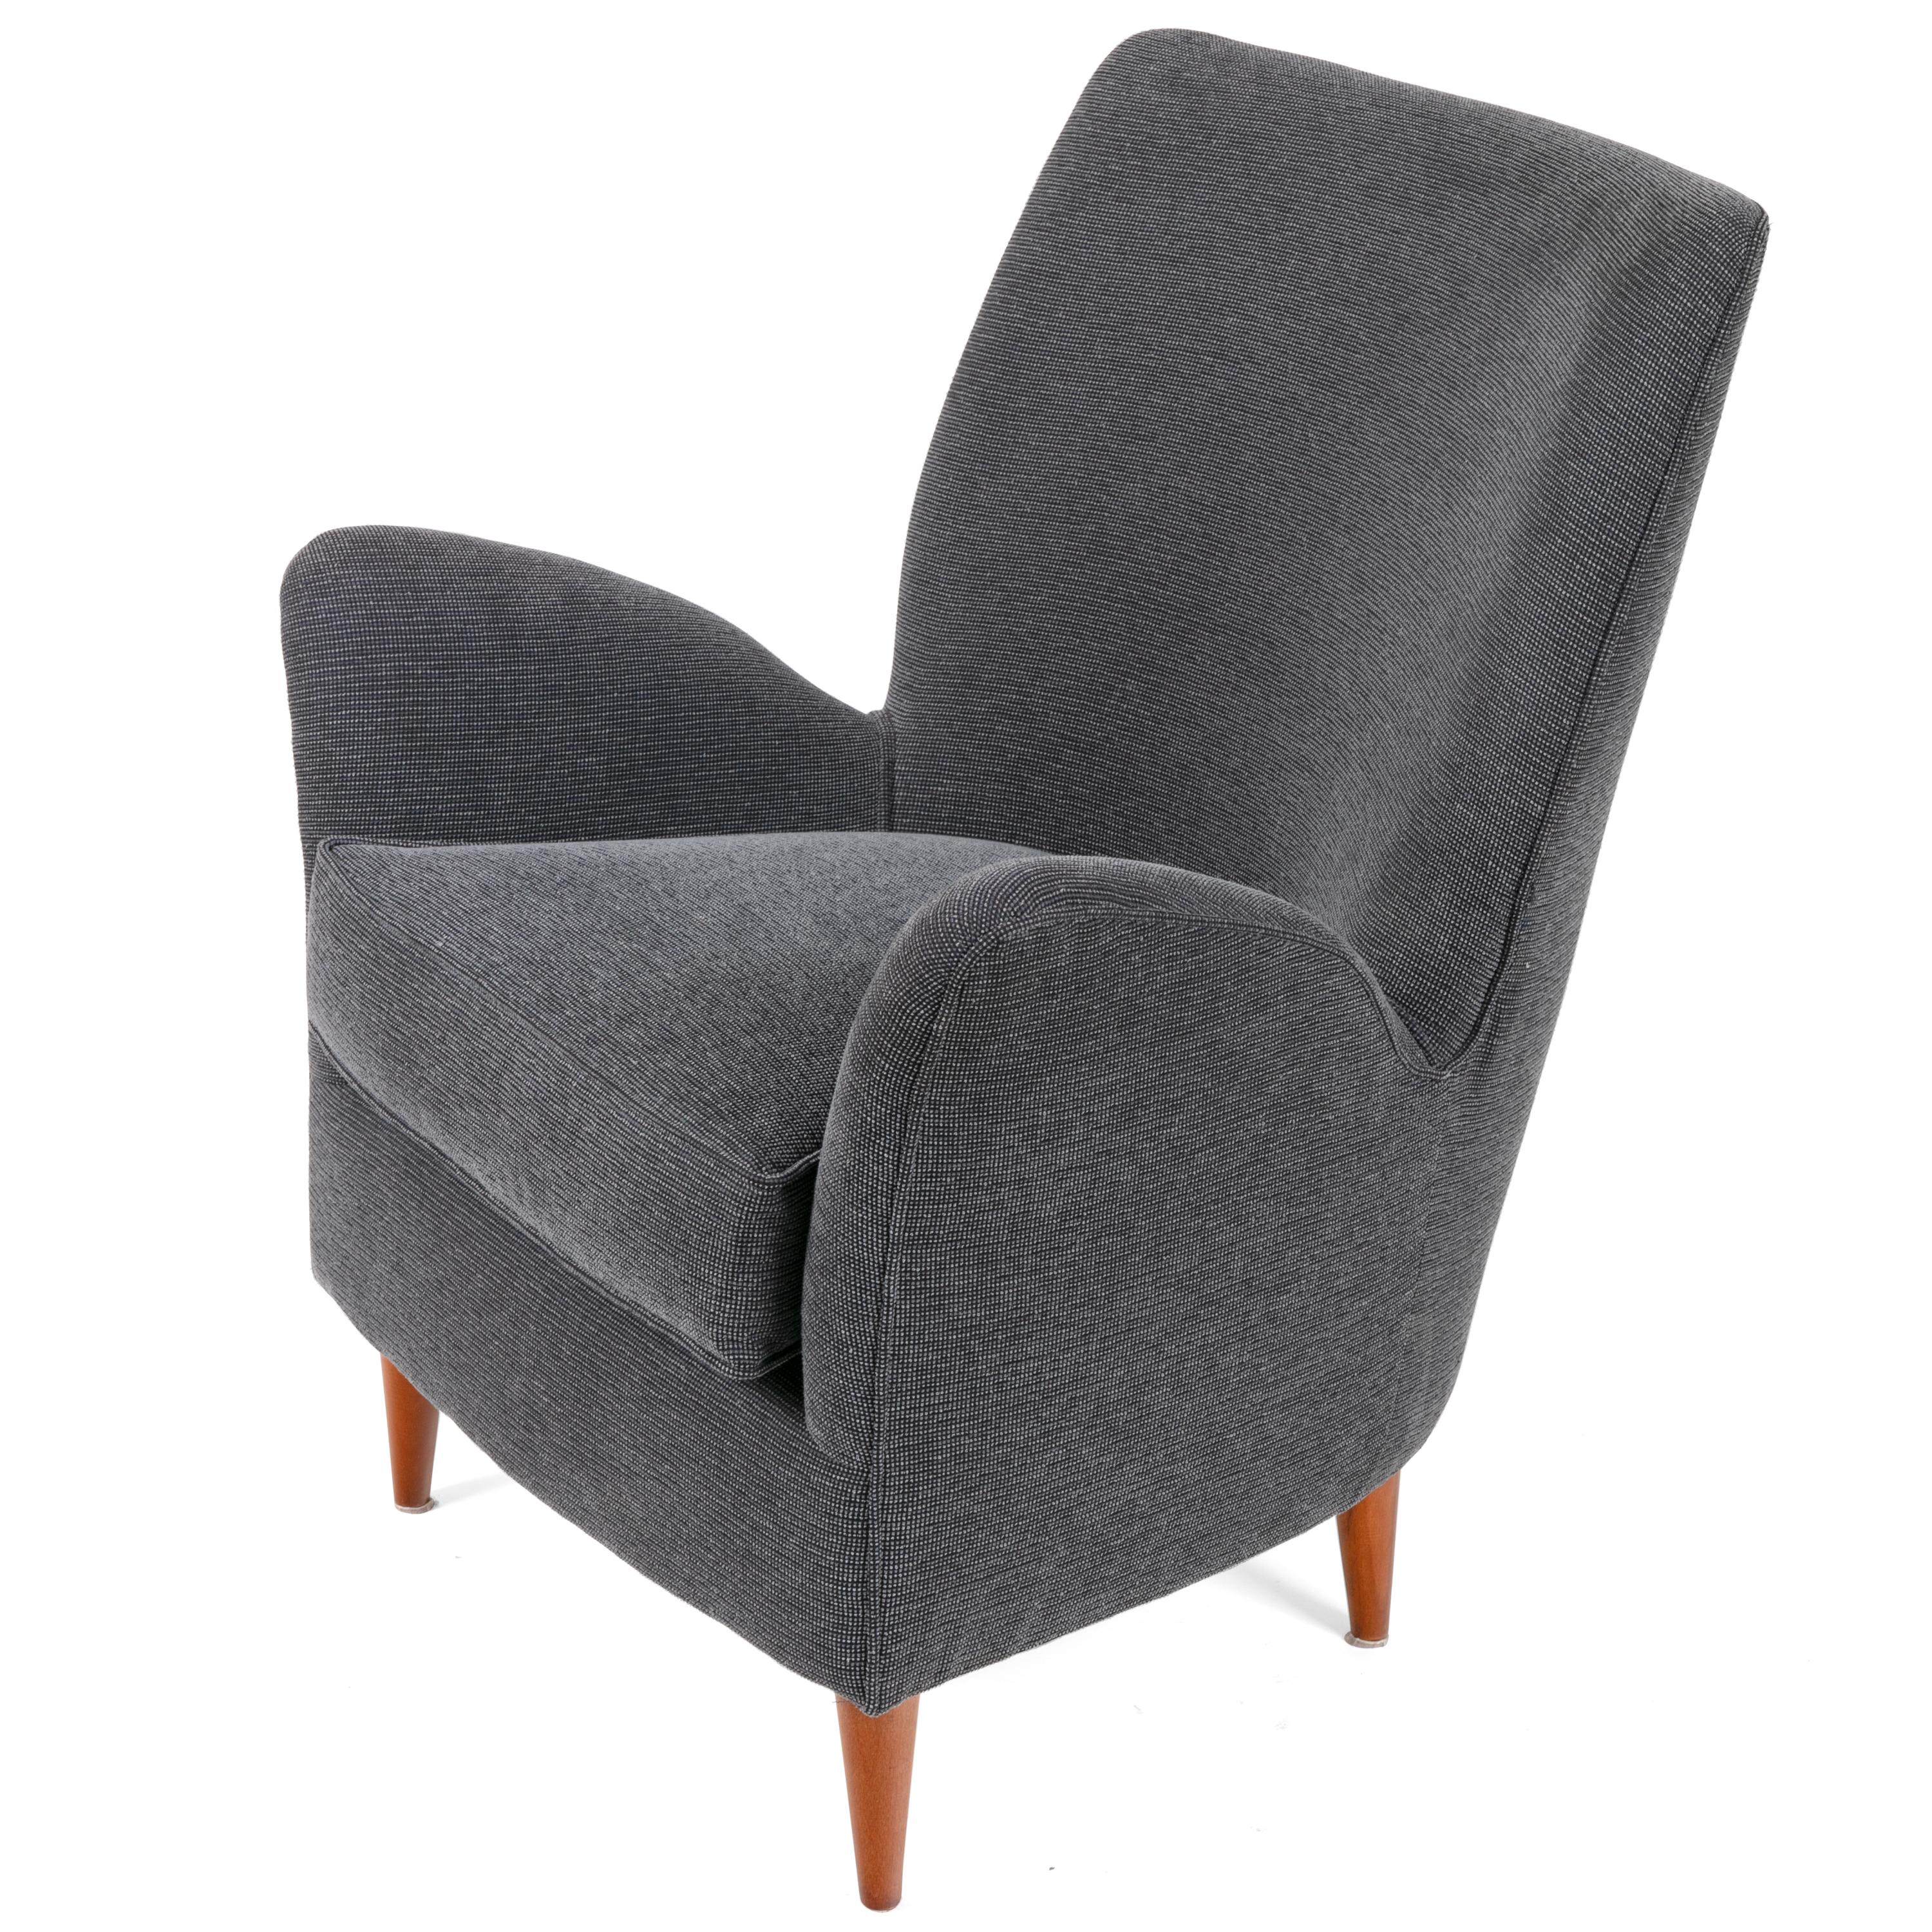 These comfortable lounge chair are in the style of the finest Italian designers of the period. They are well proportioned but are somewhat smaller than the average lounge chair which makes them perfect for smaller spaces.